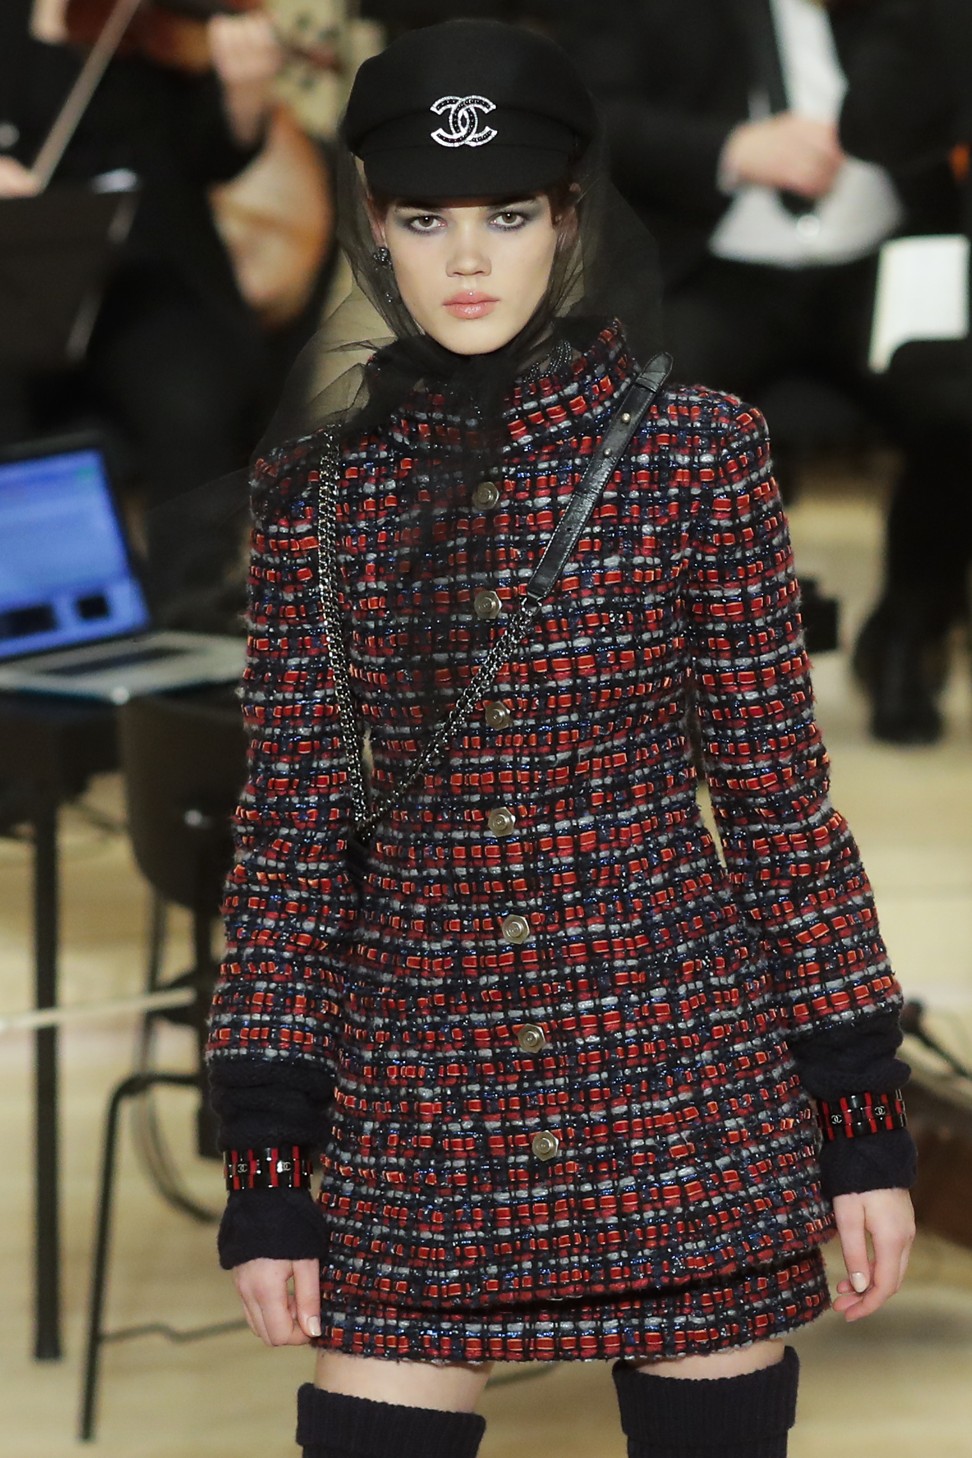 Nautical looks are revisited in tweed for Chanel's Metiers d'Art fashion collection. Photo: AP